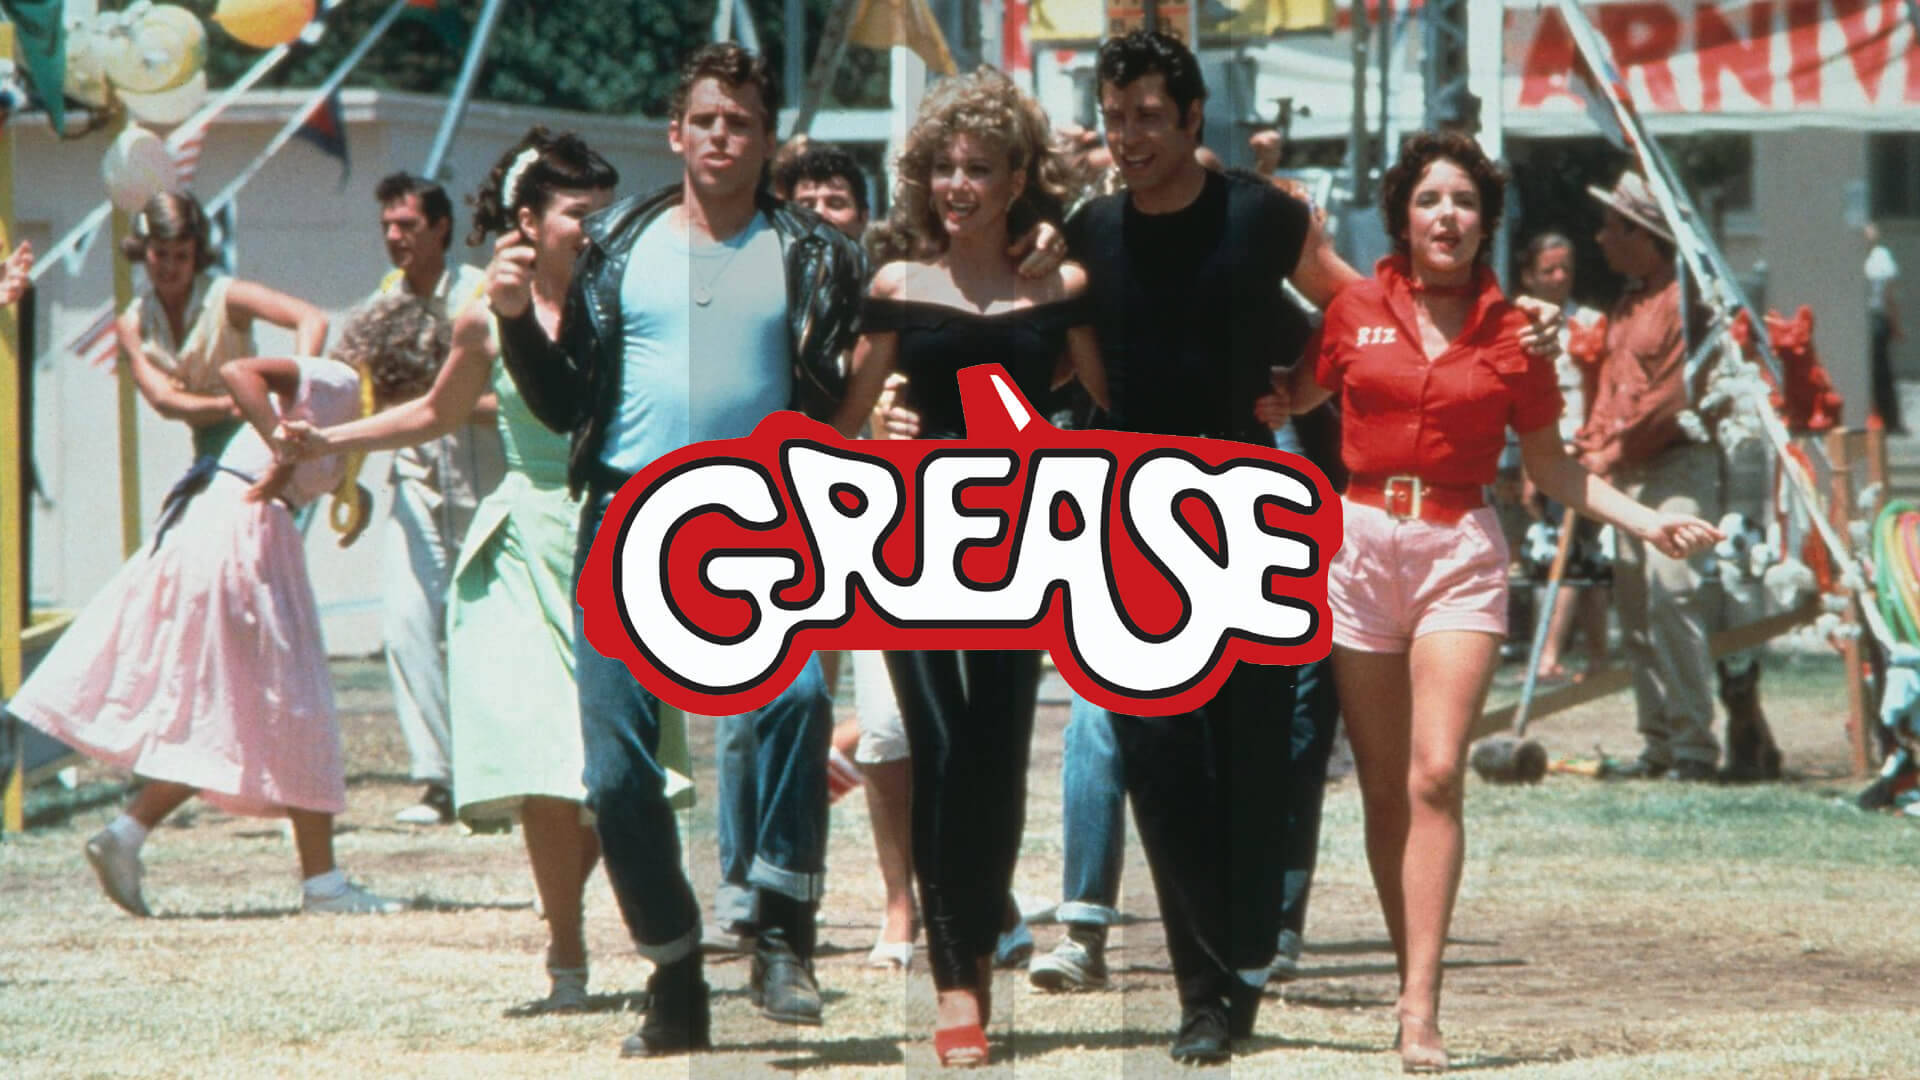 Grease Background Wallpaper